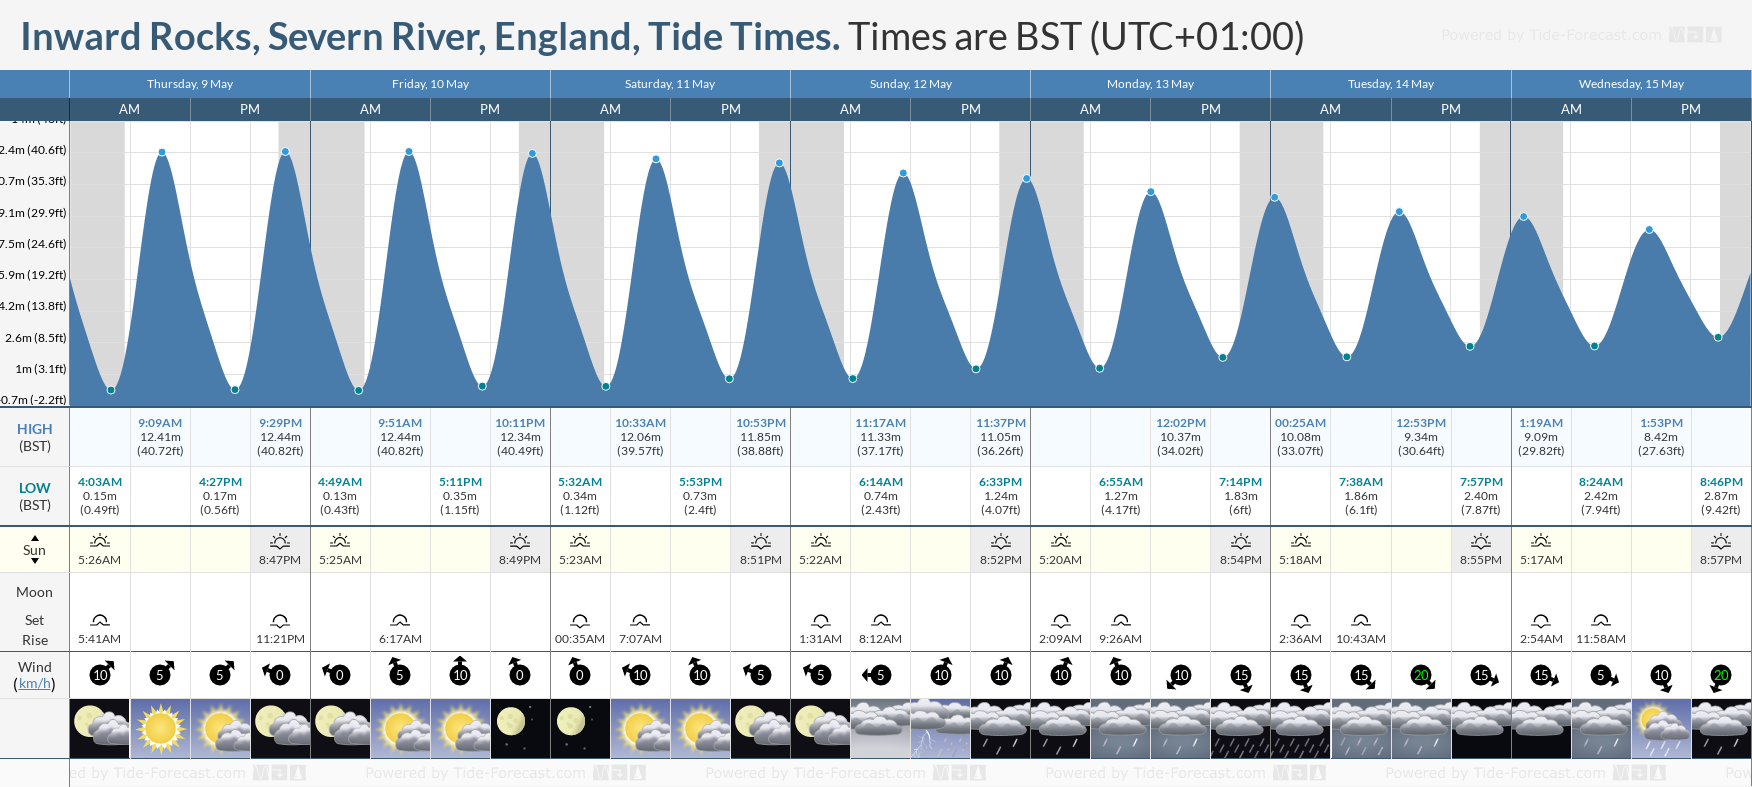 Inward Rocks, Severn River, England Tide Chart including high and low tide times for the next 7 days